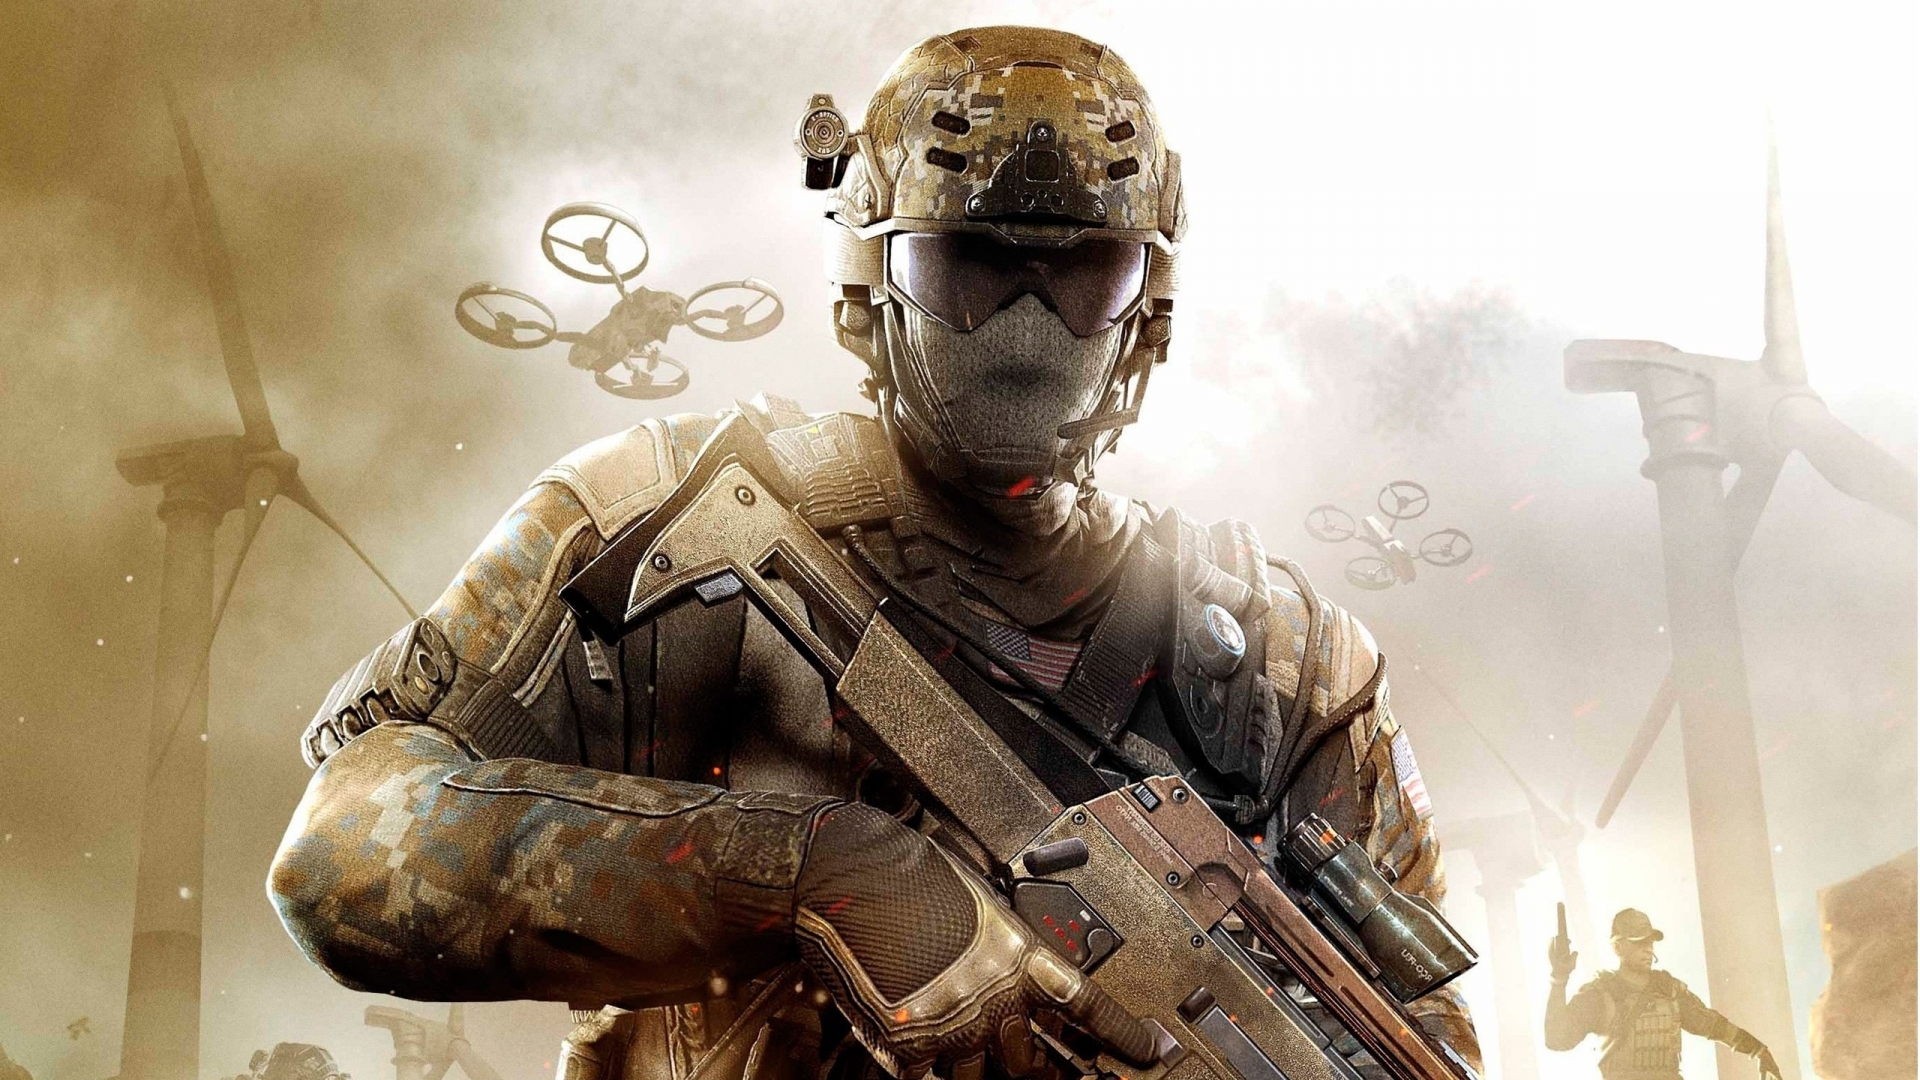 Call of Duty Black Ops 2 Soldier for 1920 x 1080 HDTV 1080p resolution